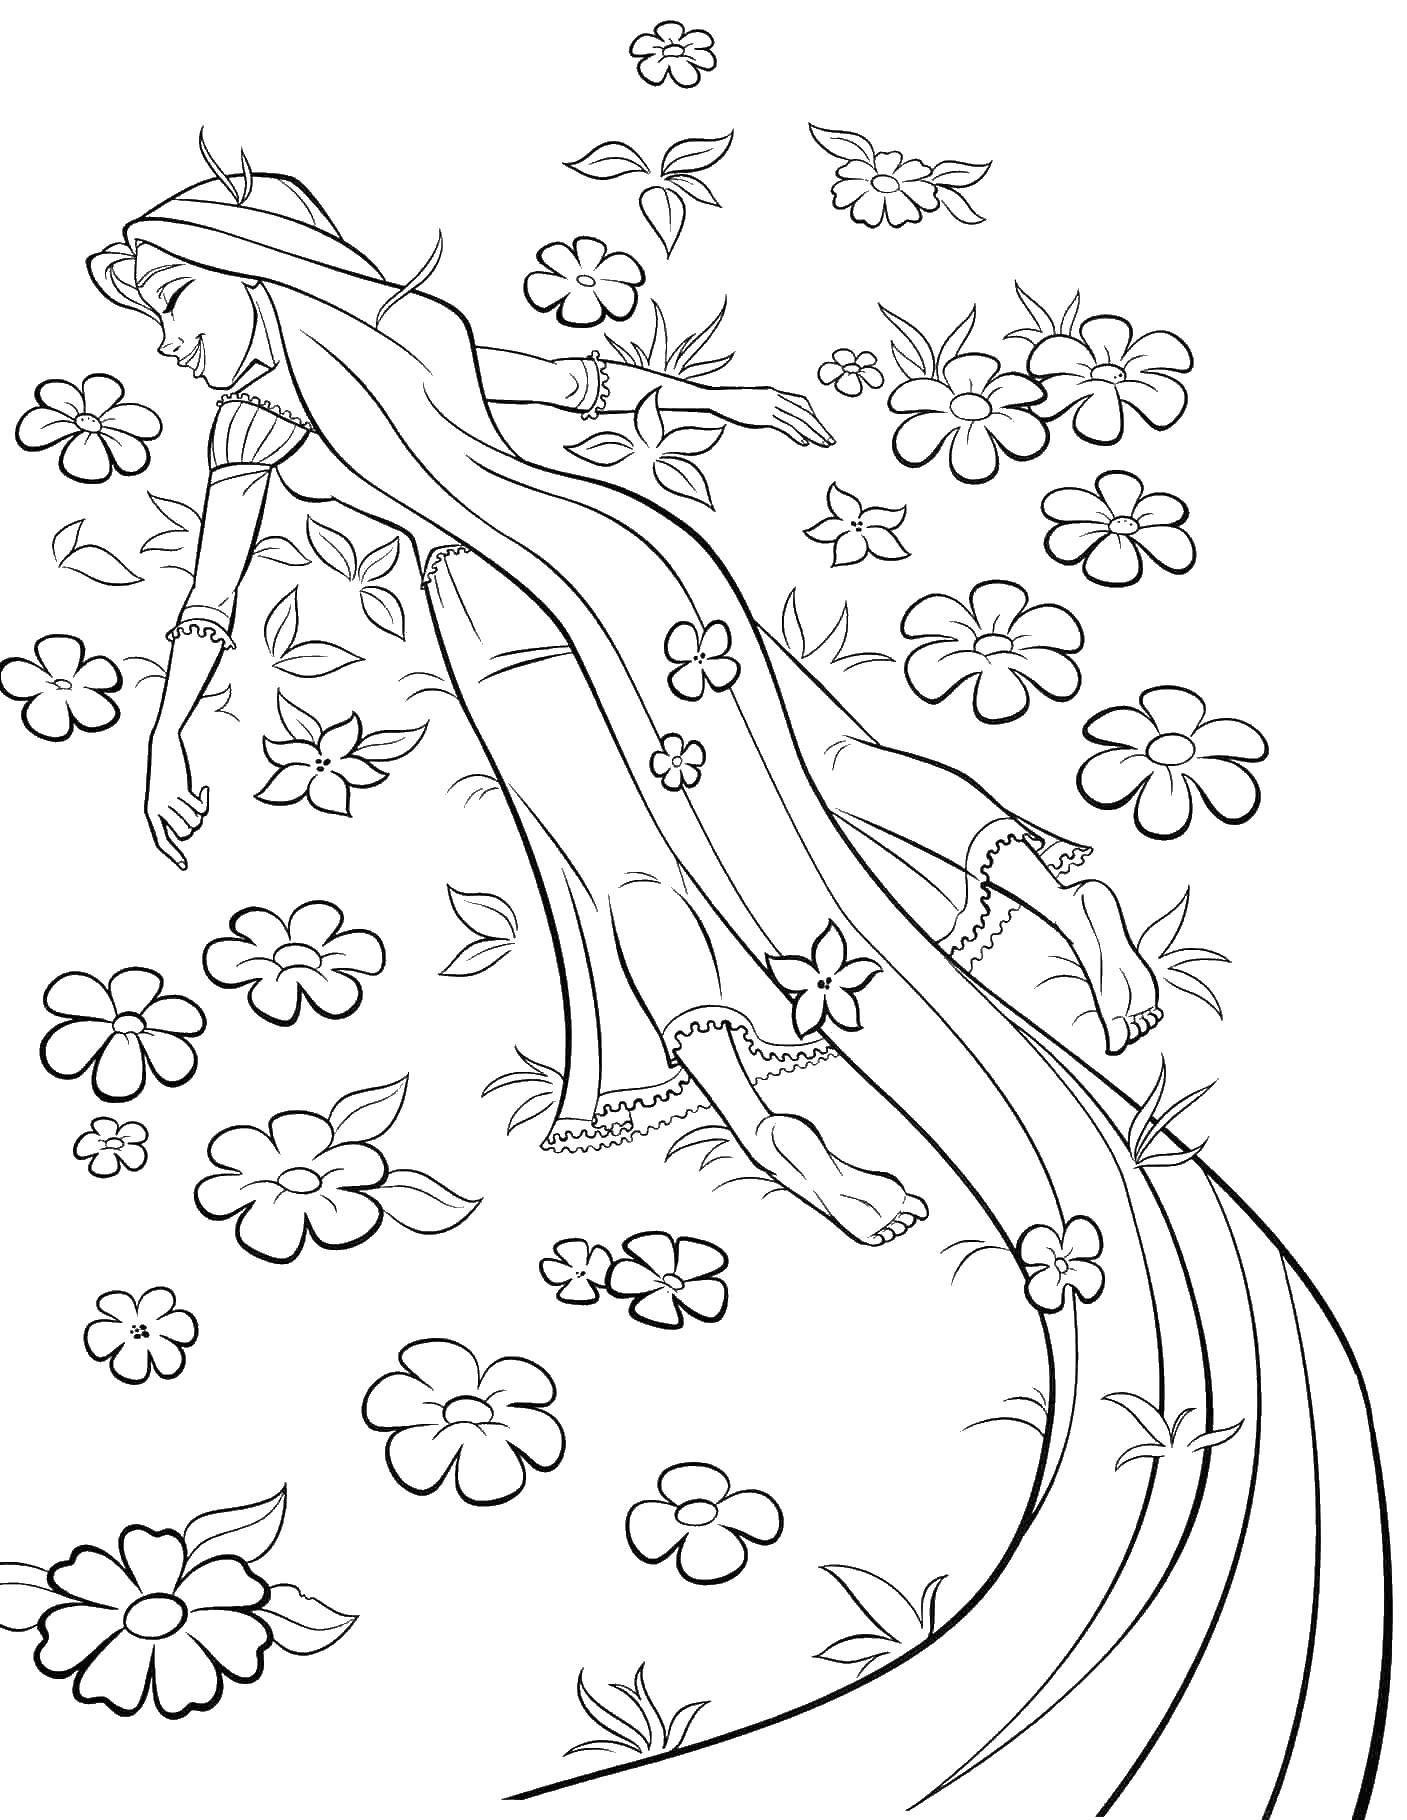 Coloring Rapunzel is lying on a meadow. Category coloring pages Rapunzel tangled. Tags:  Rapunzel .